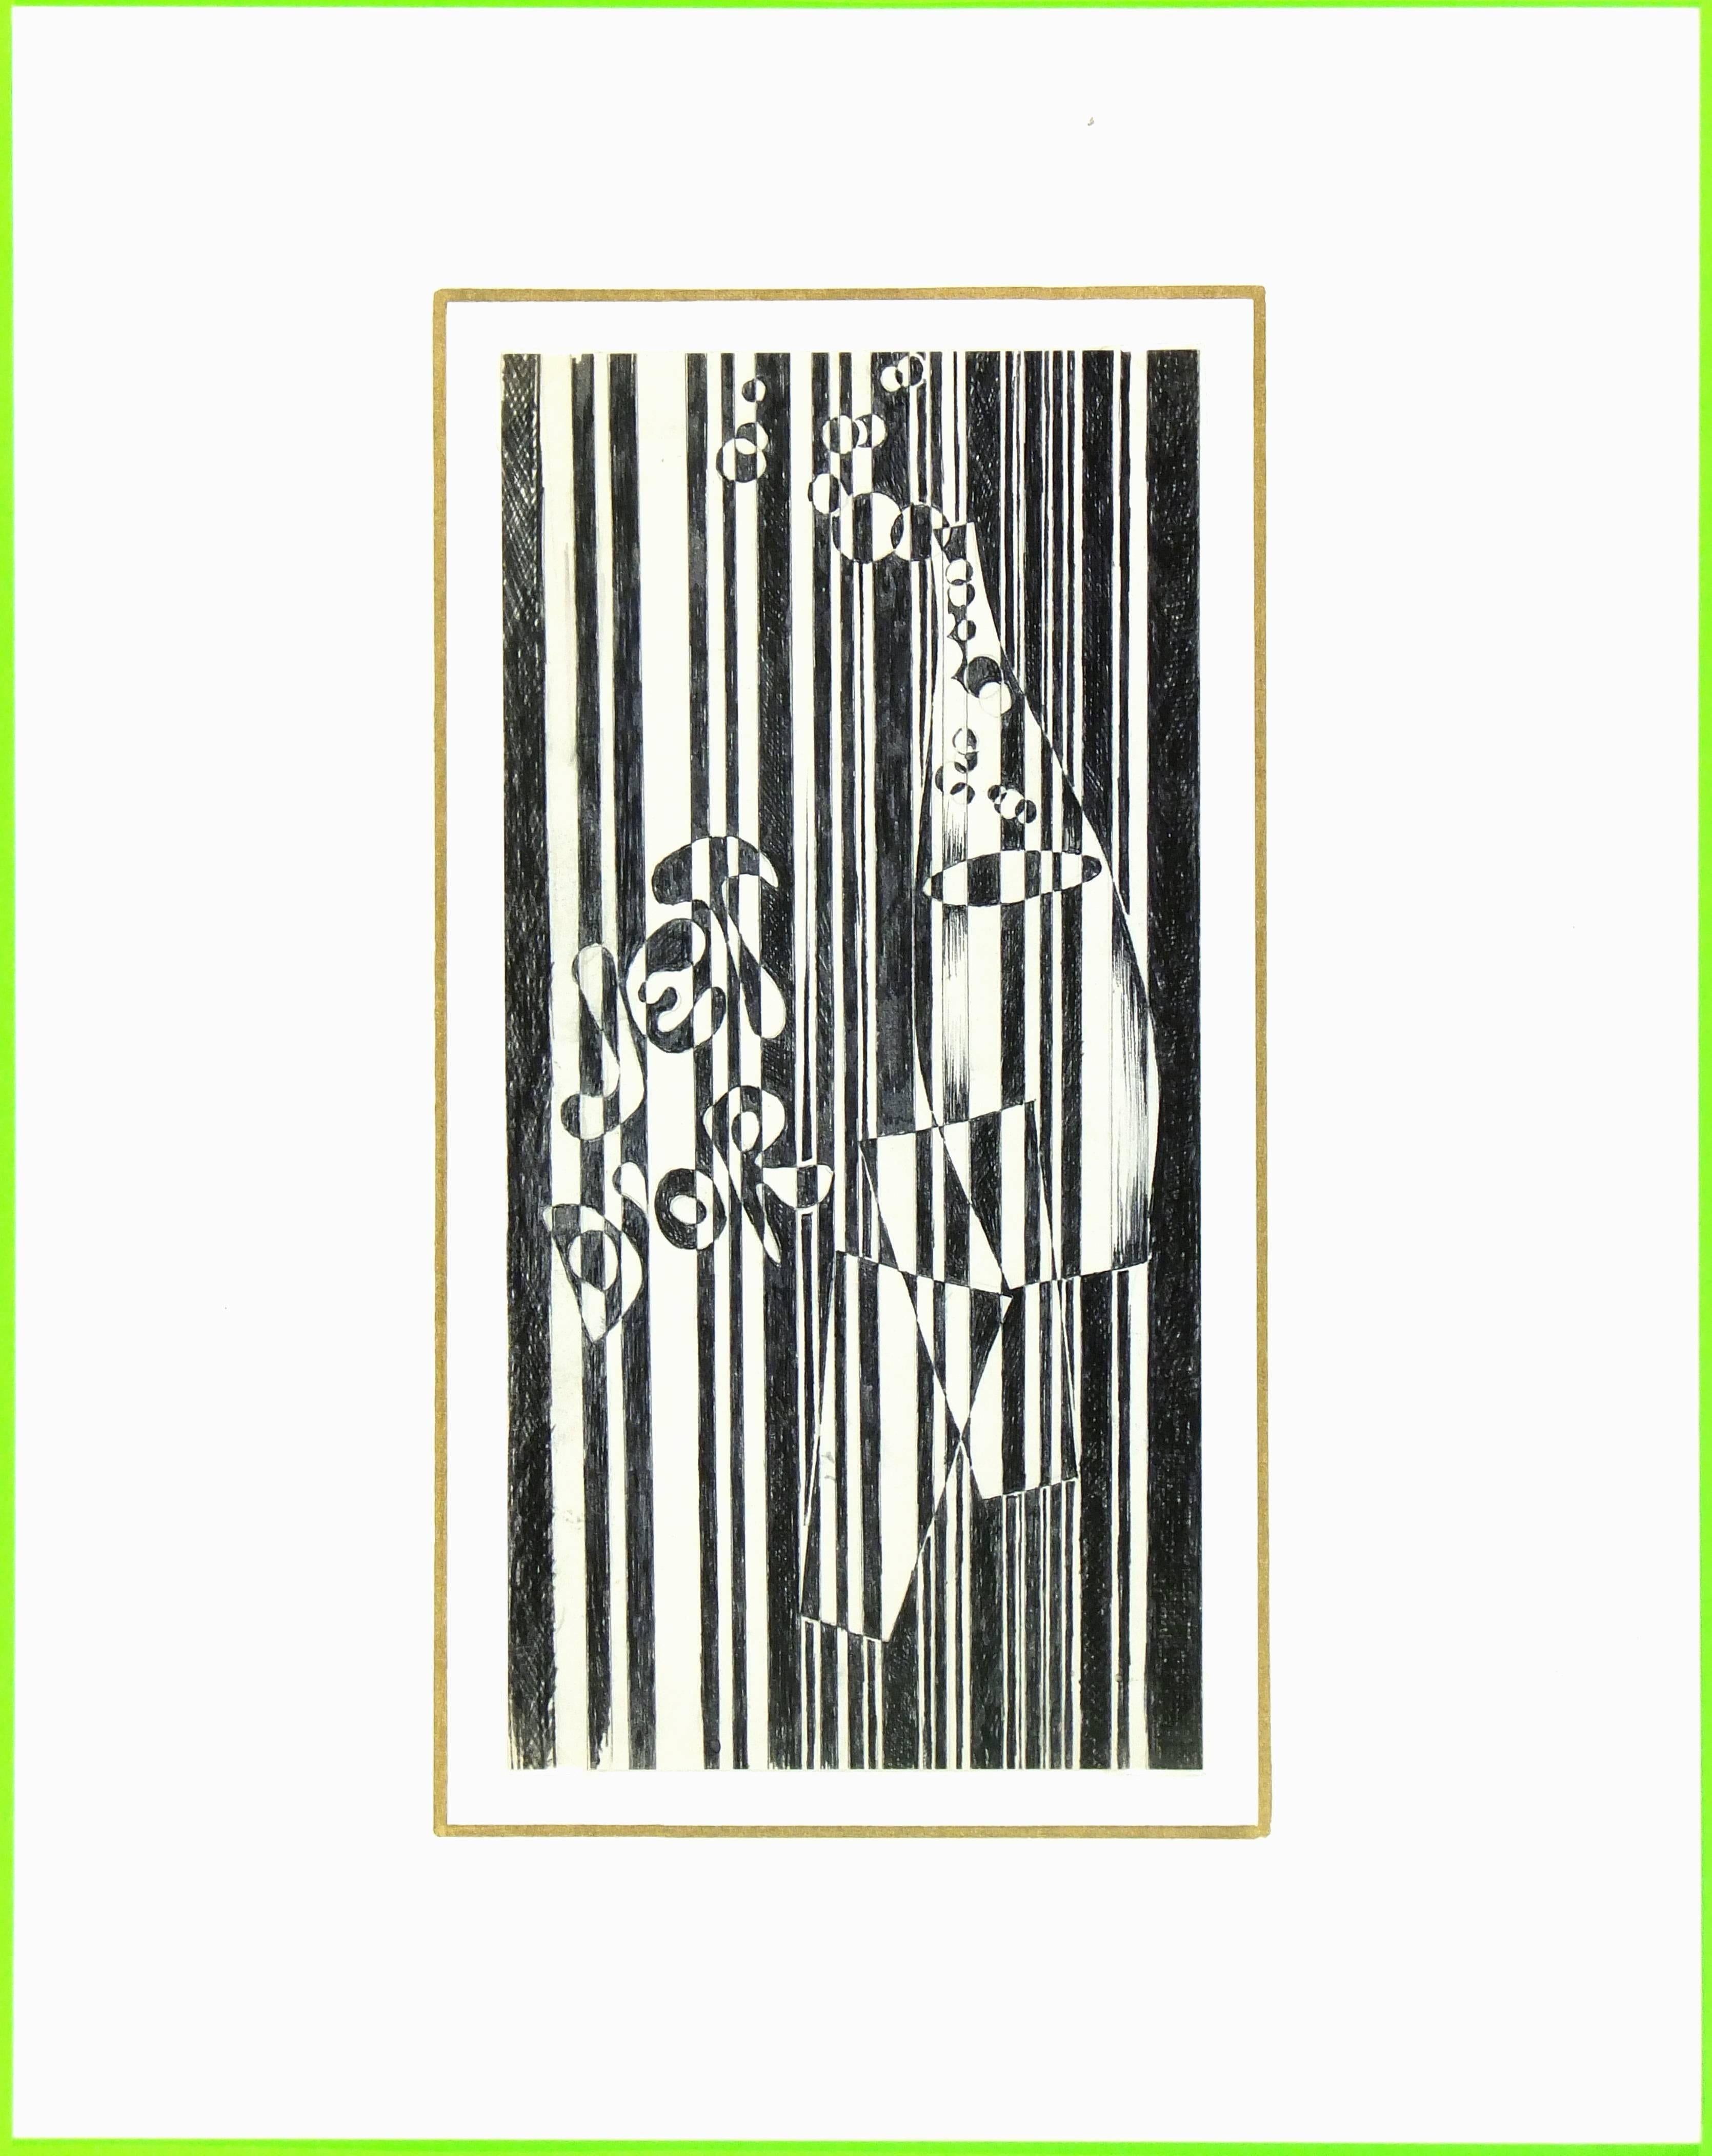 Contrasting black and white pen and ink French abstract, 1980s.  

Original artwork on paper displayed on a white mat with a gold border. Mat fits a standard-size frame.  Archival plastic sleeve and Certificate of Authenticity included. Artwork,